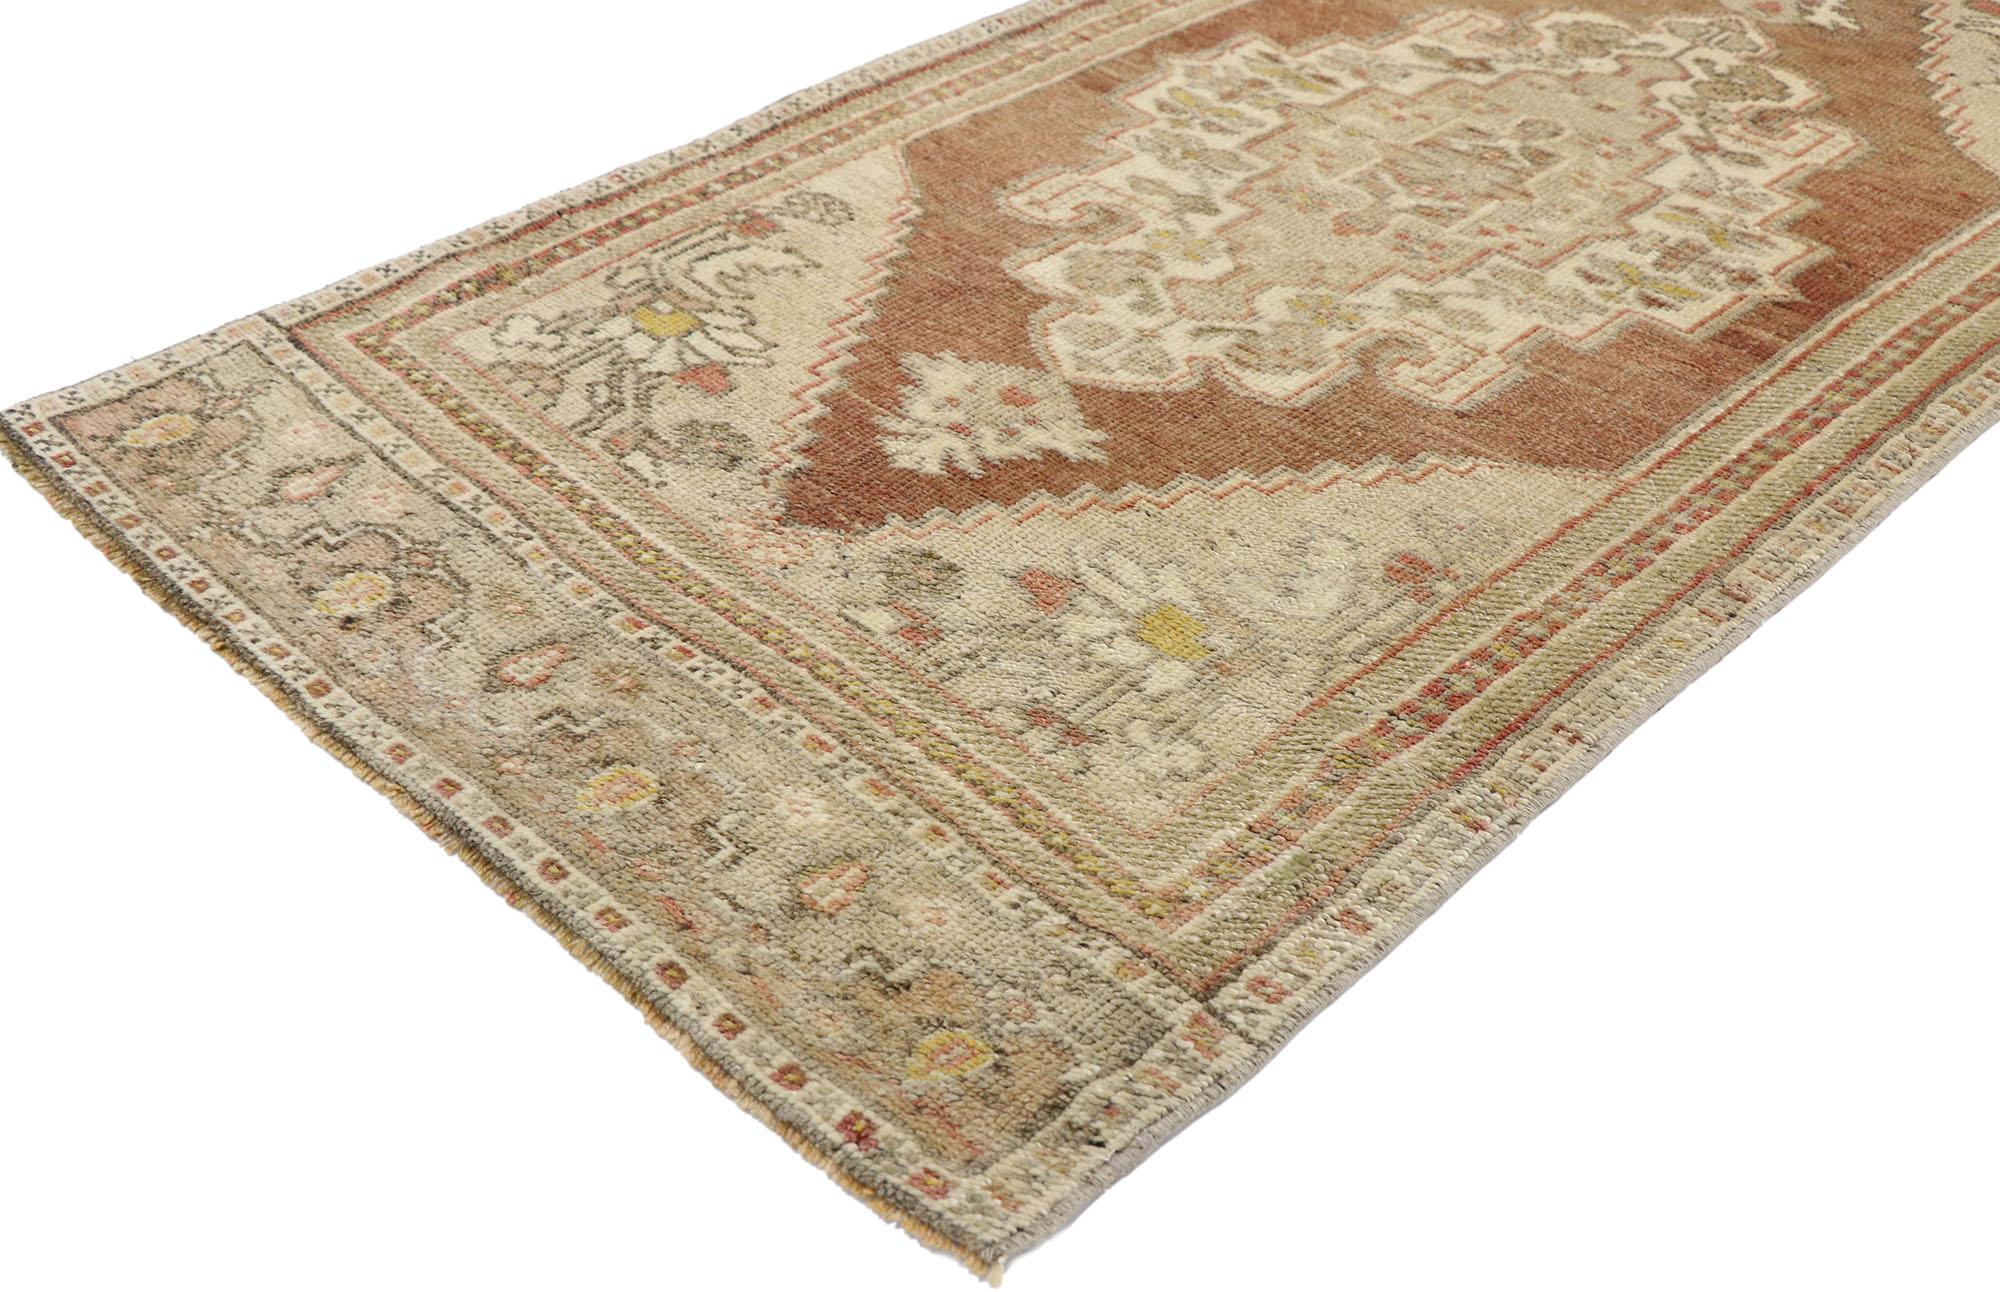 53518 Vintage Turkish Oushak rug with Traditional Modern style. Emanating timeless appeal and neutral hues, this hand knotted wool vintage Turkish Oushak rug exhibits a nostalgic charm with an eclectic vibe that is especially suitable within a